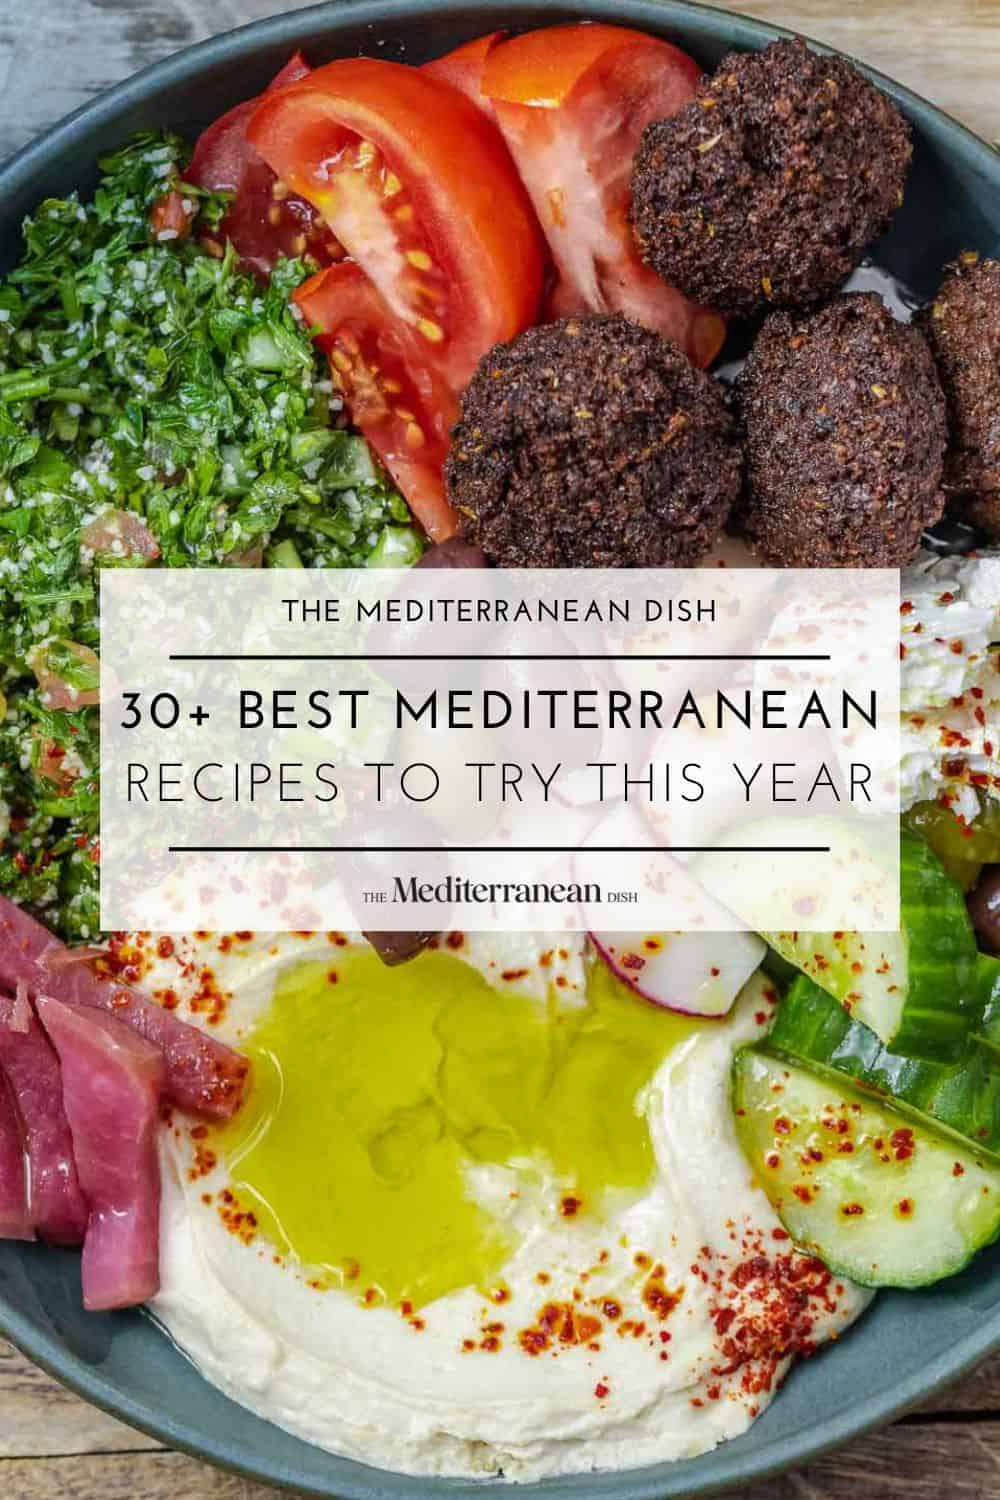 Spicy Mediterranean Lunch Bowl Recipe (Meal Prep Option) - Beauty